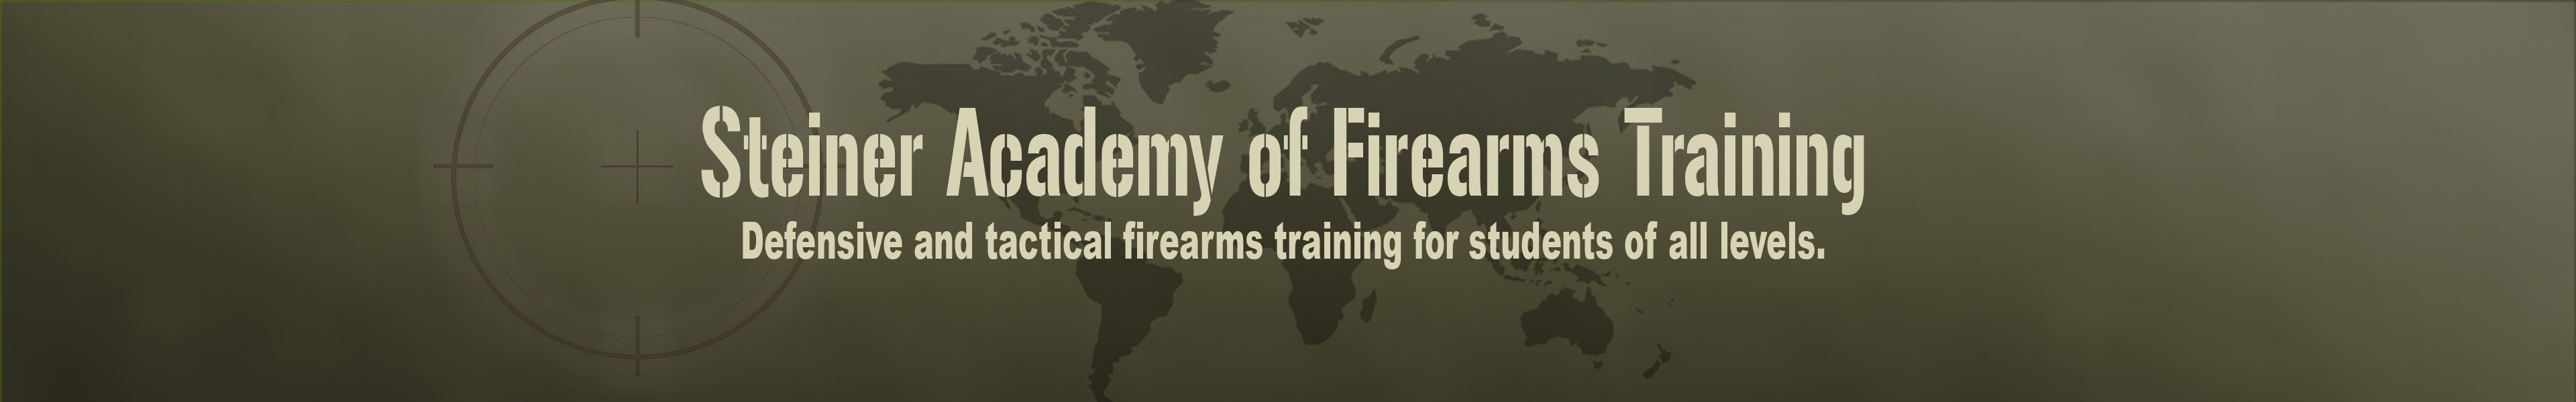 Steiner Academy of Firearms Training